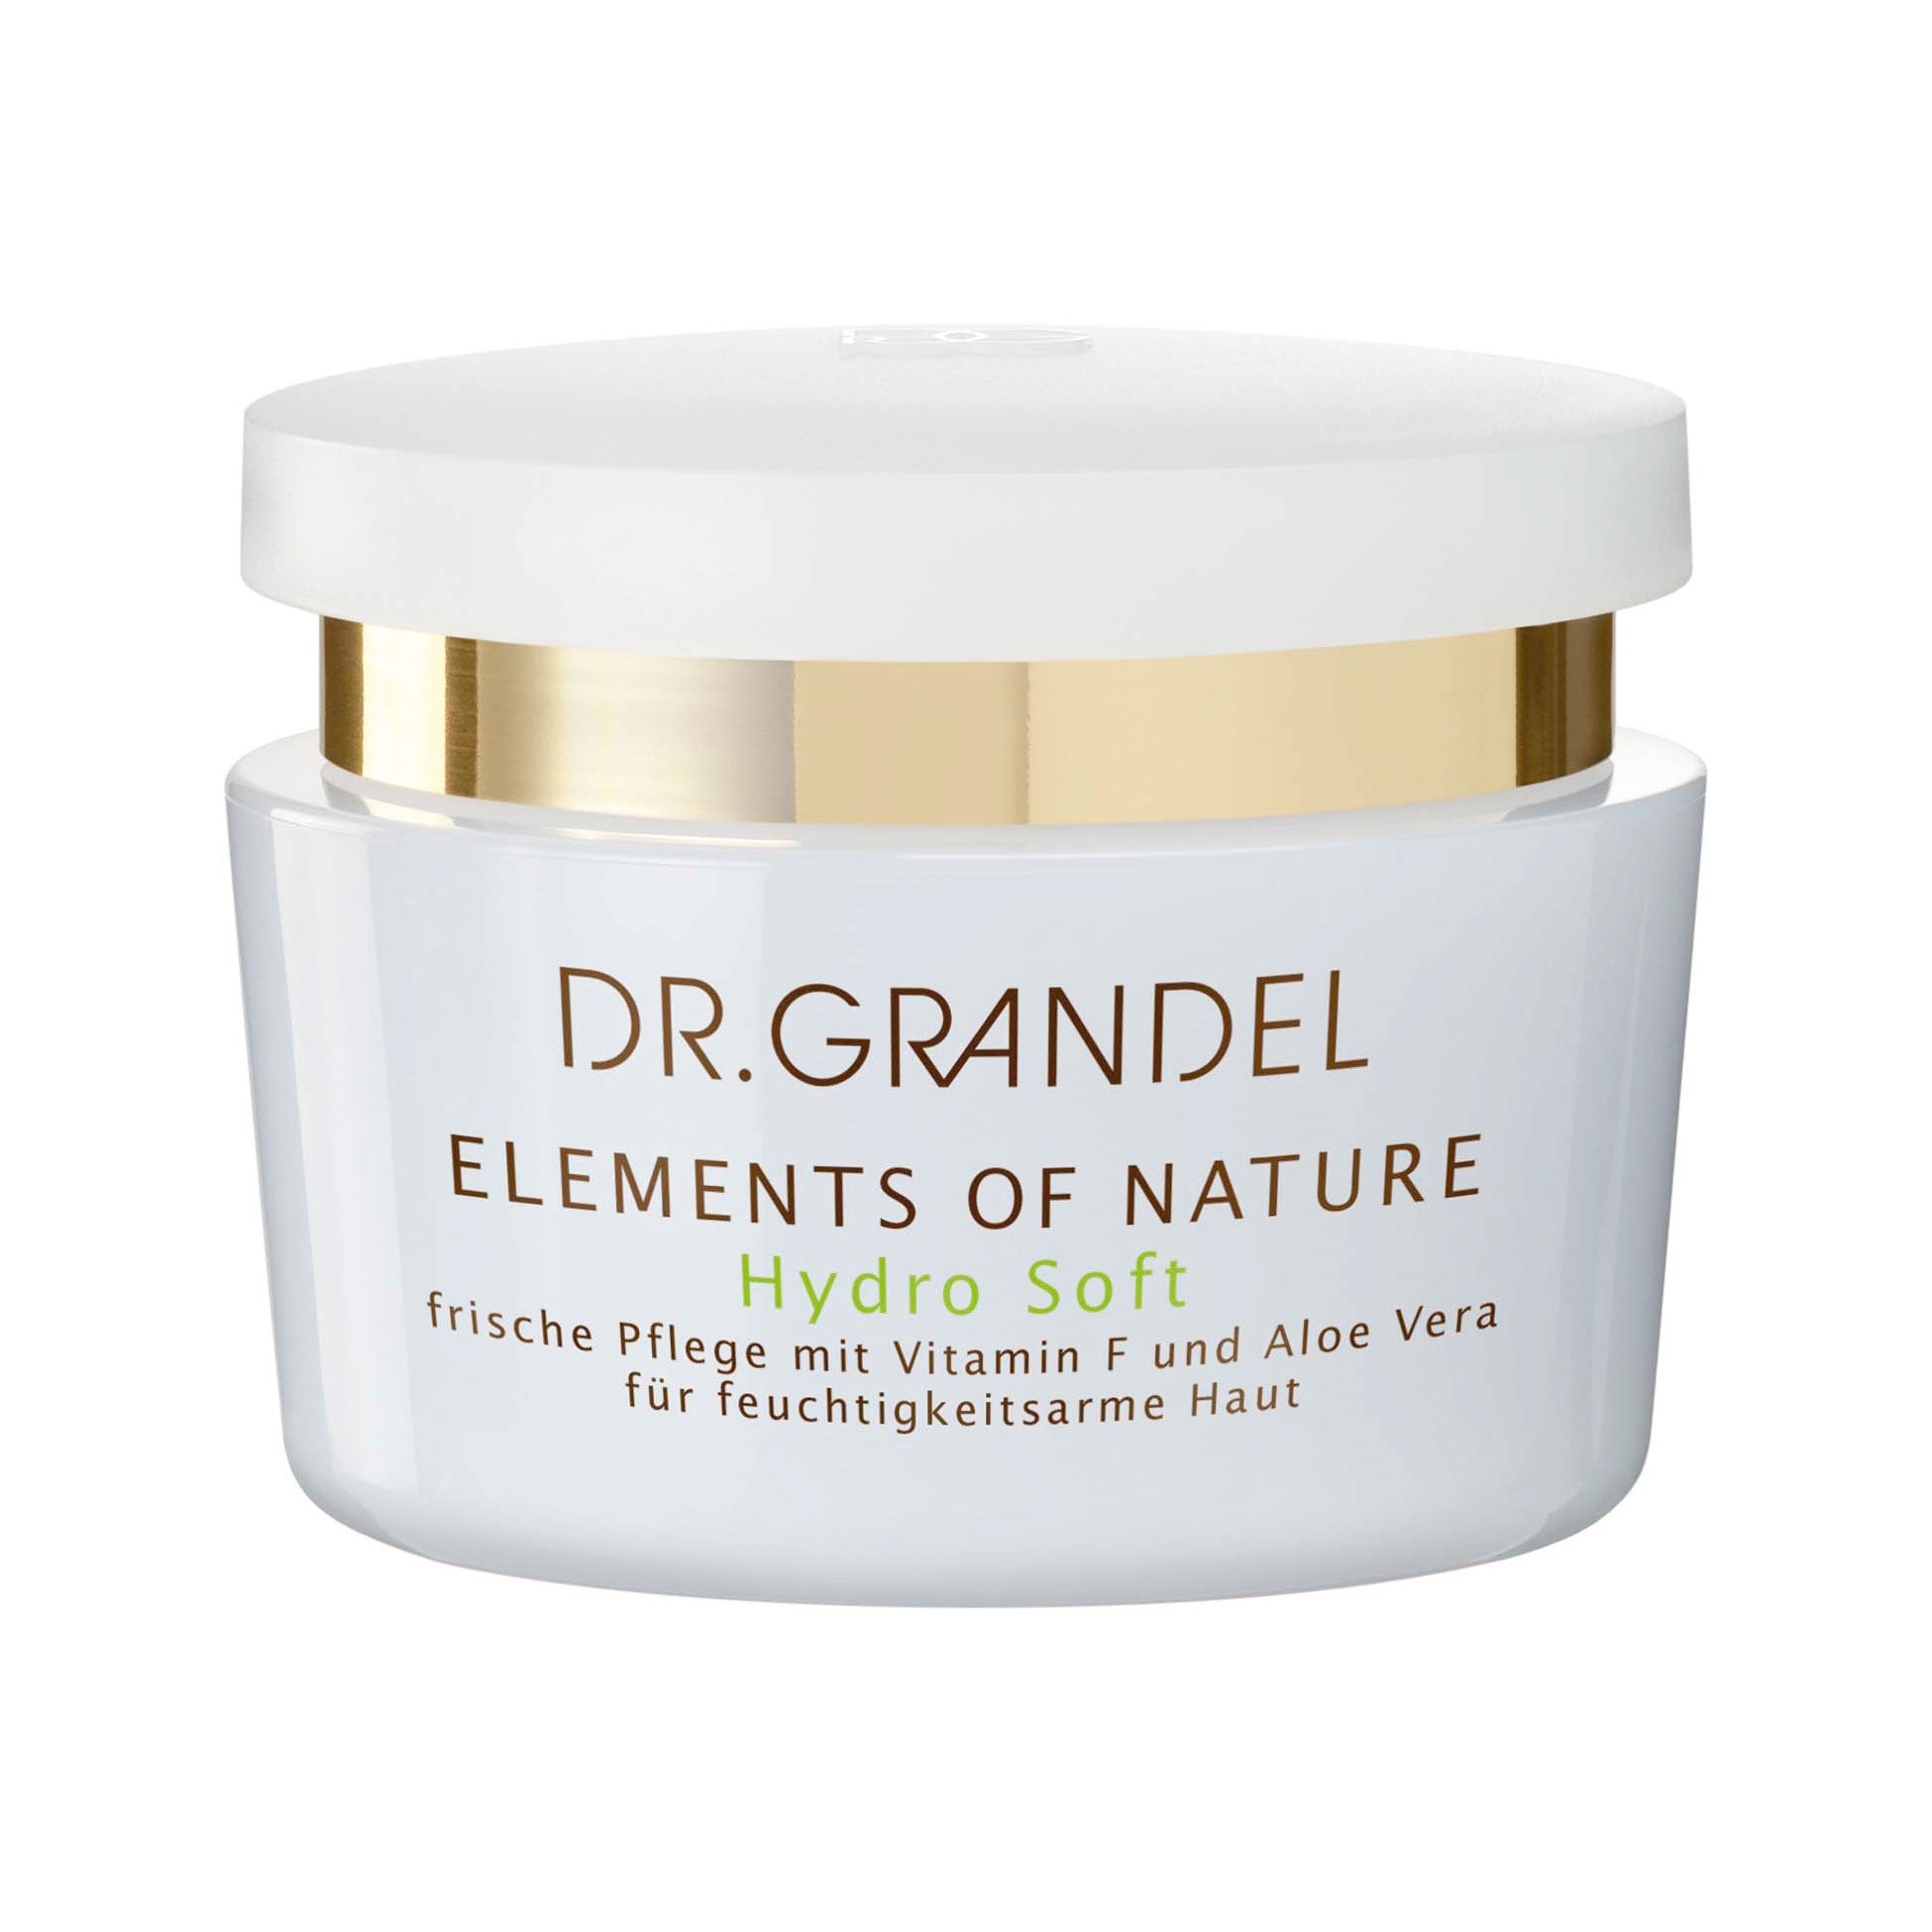 Dr. Grandel Elements of Nature Hydro Soft